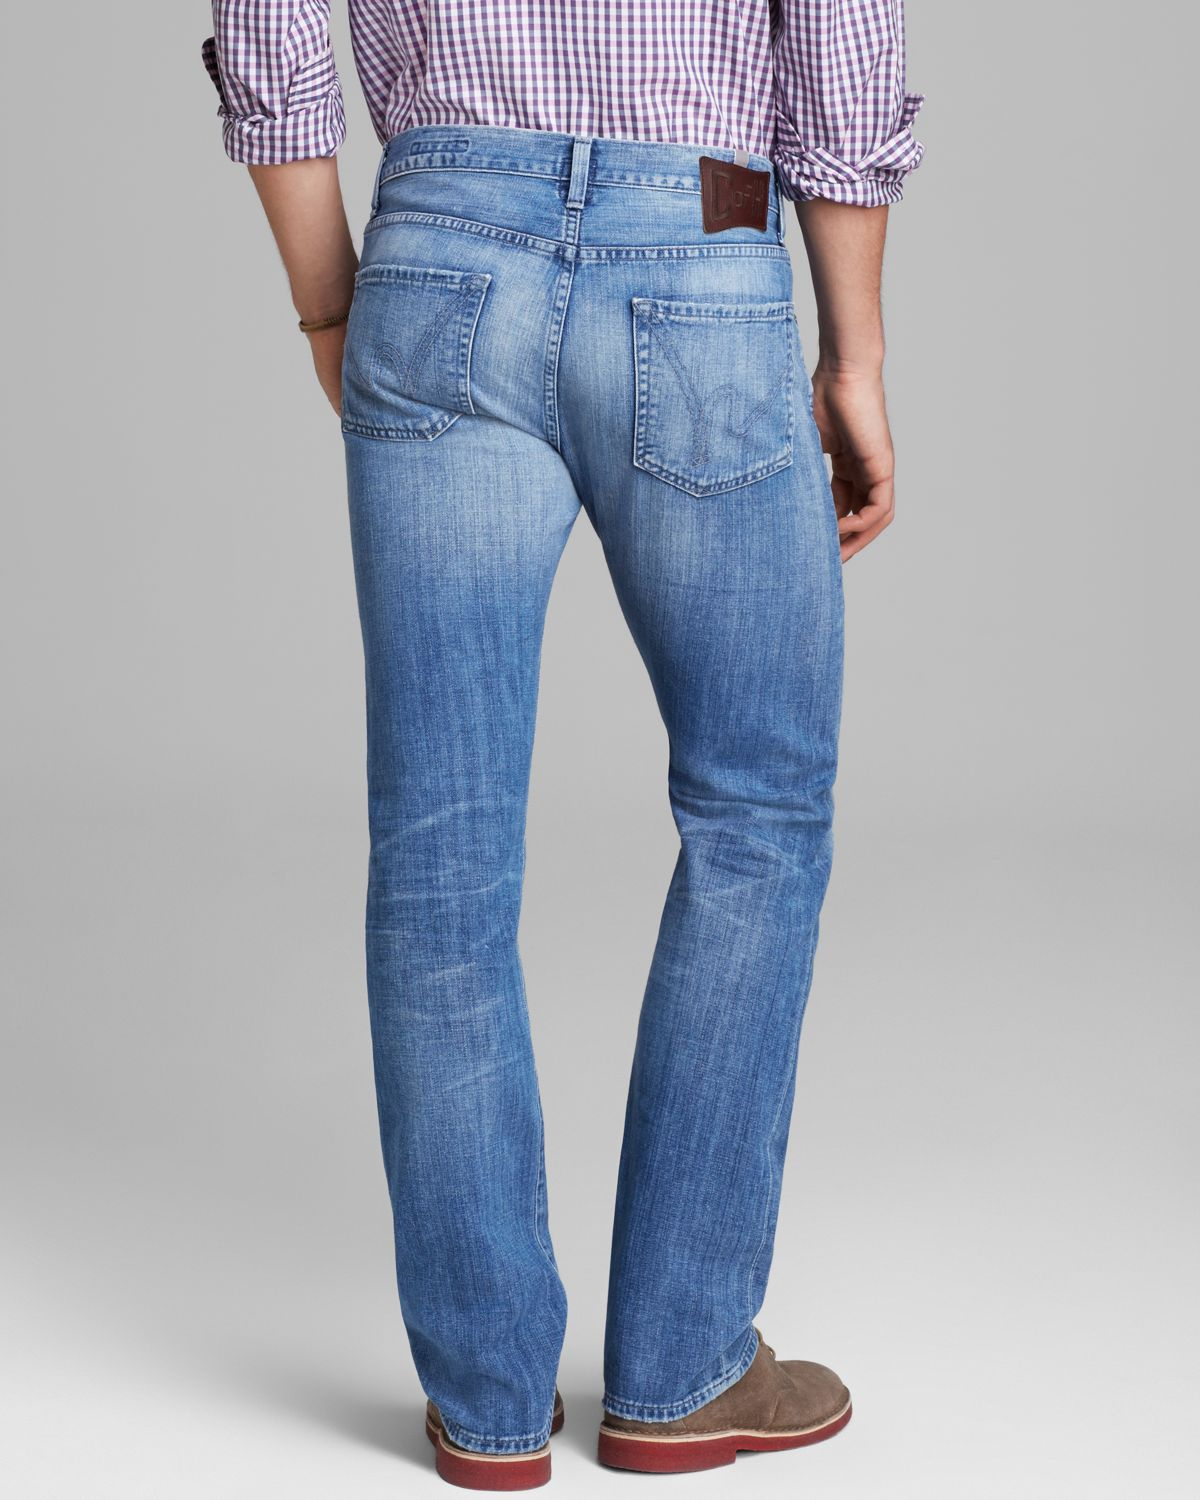 Lyst - Citizens Of Humanity Jeans Sid Straight Fit in Jordan in Blue ...